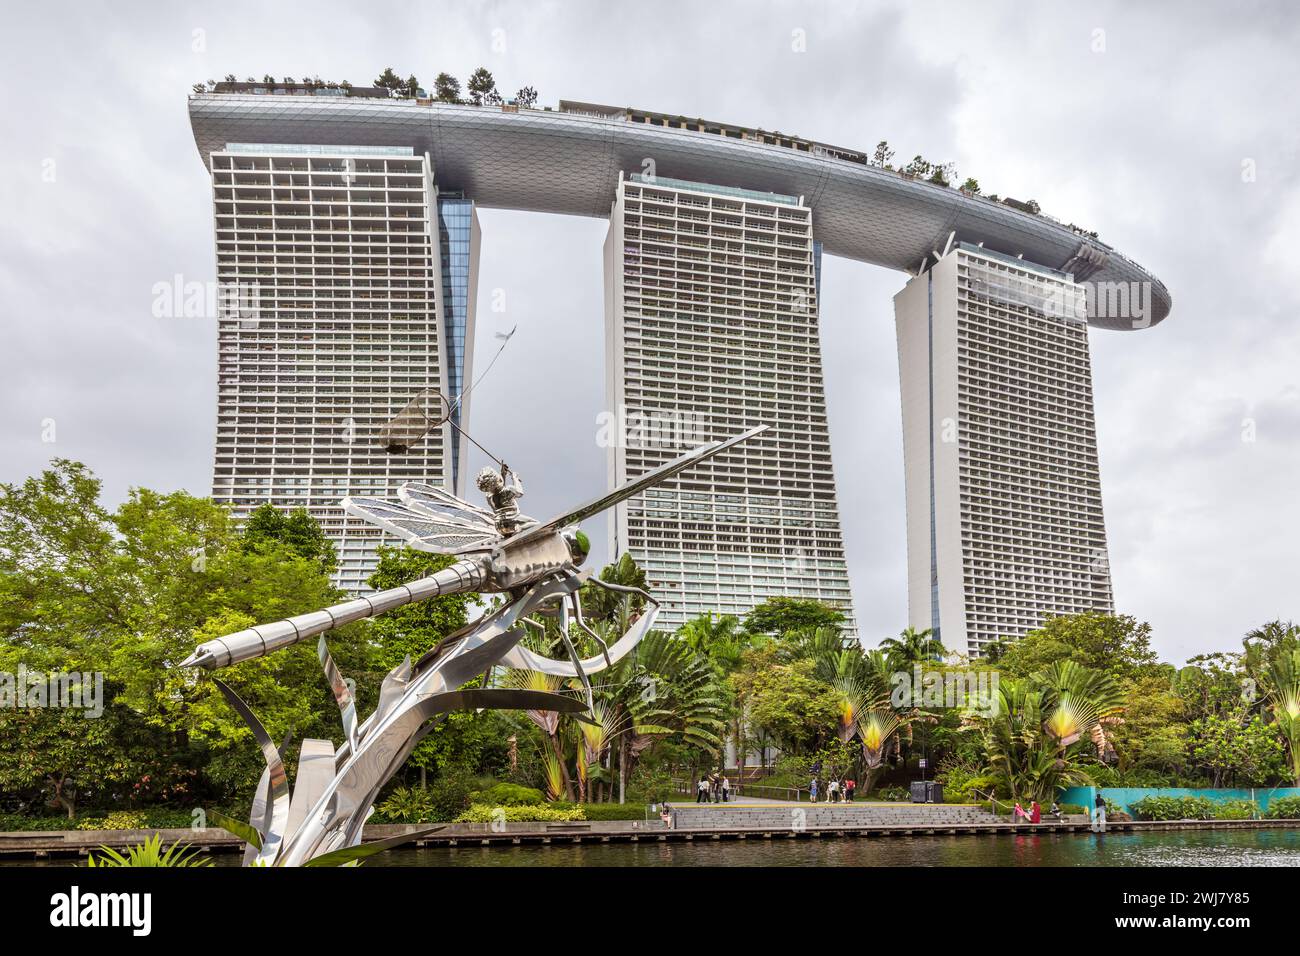 Metal dragonfly sculpture at Gardens by the Bay with iconic Marina Bay Sands Hotel in the background Stock Photo